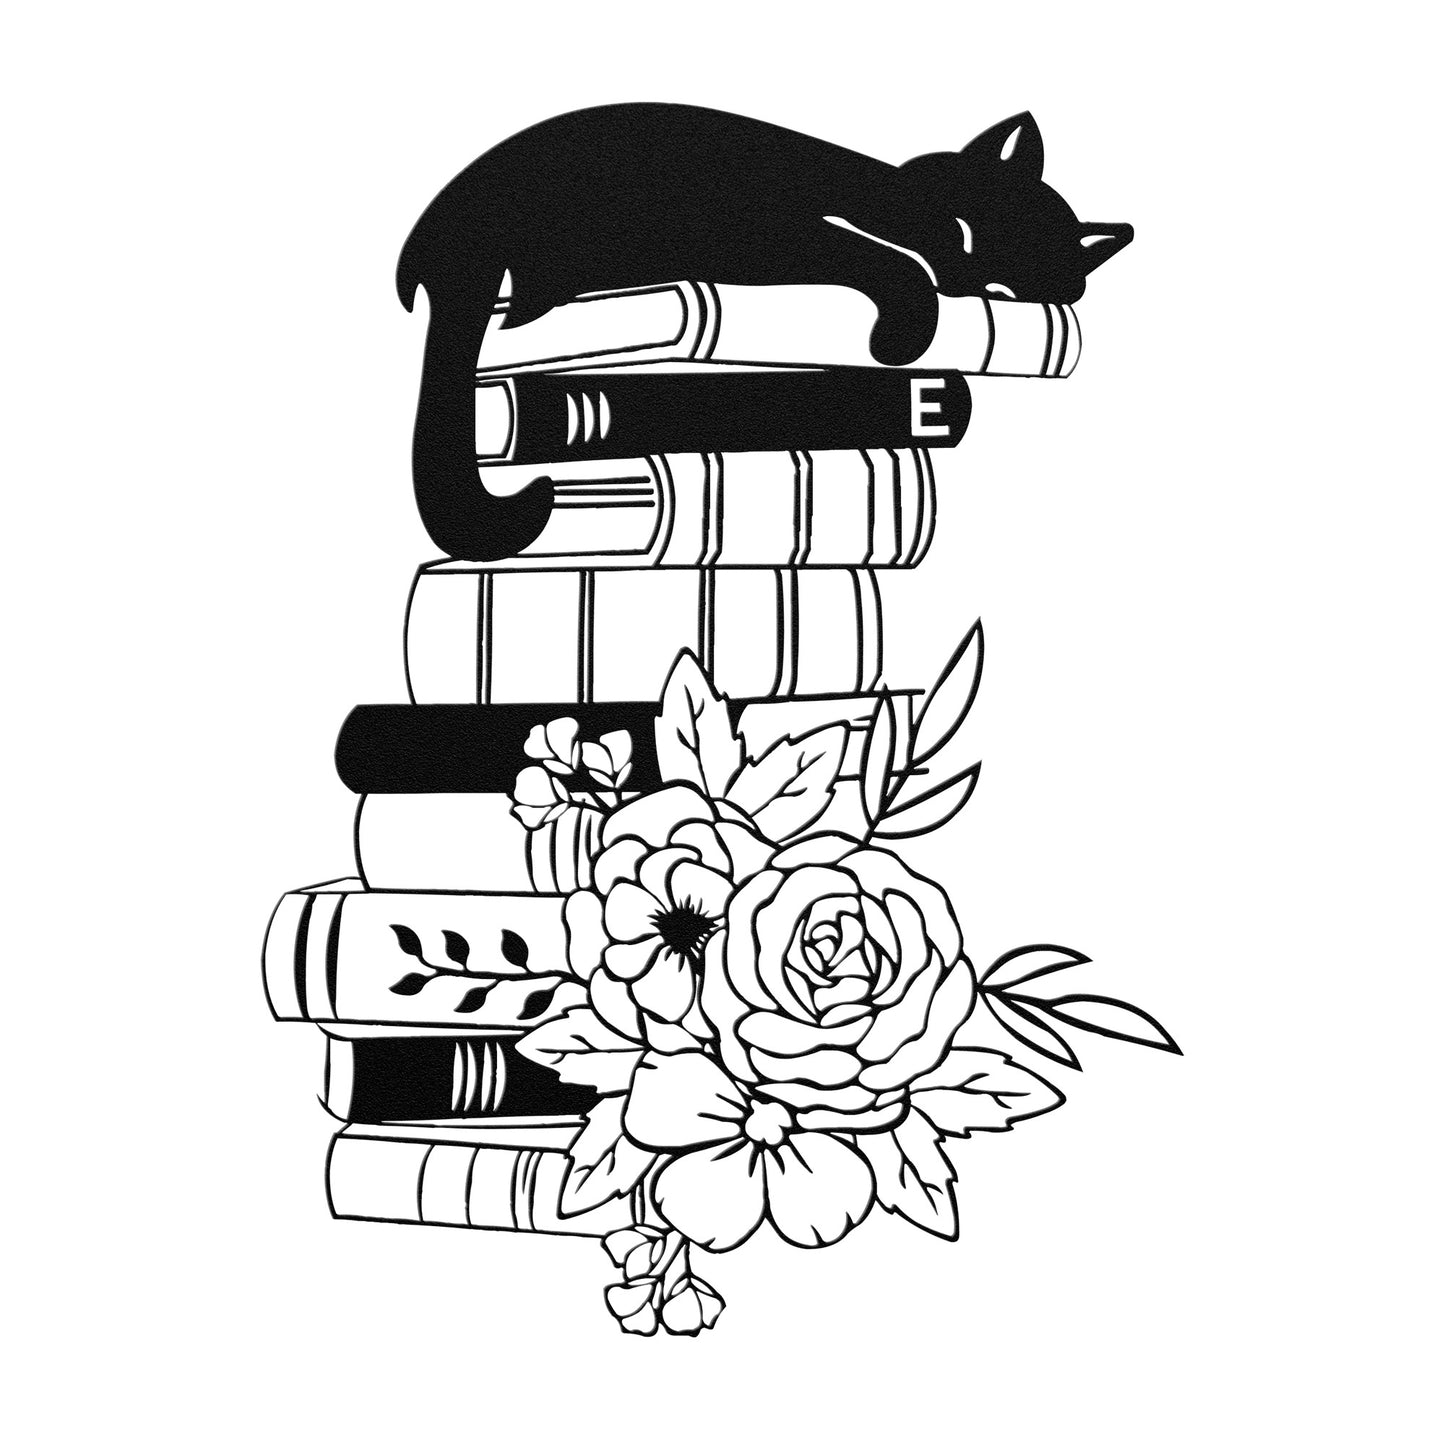 Cats and Books Metal Wall Art